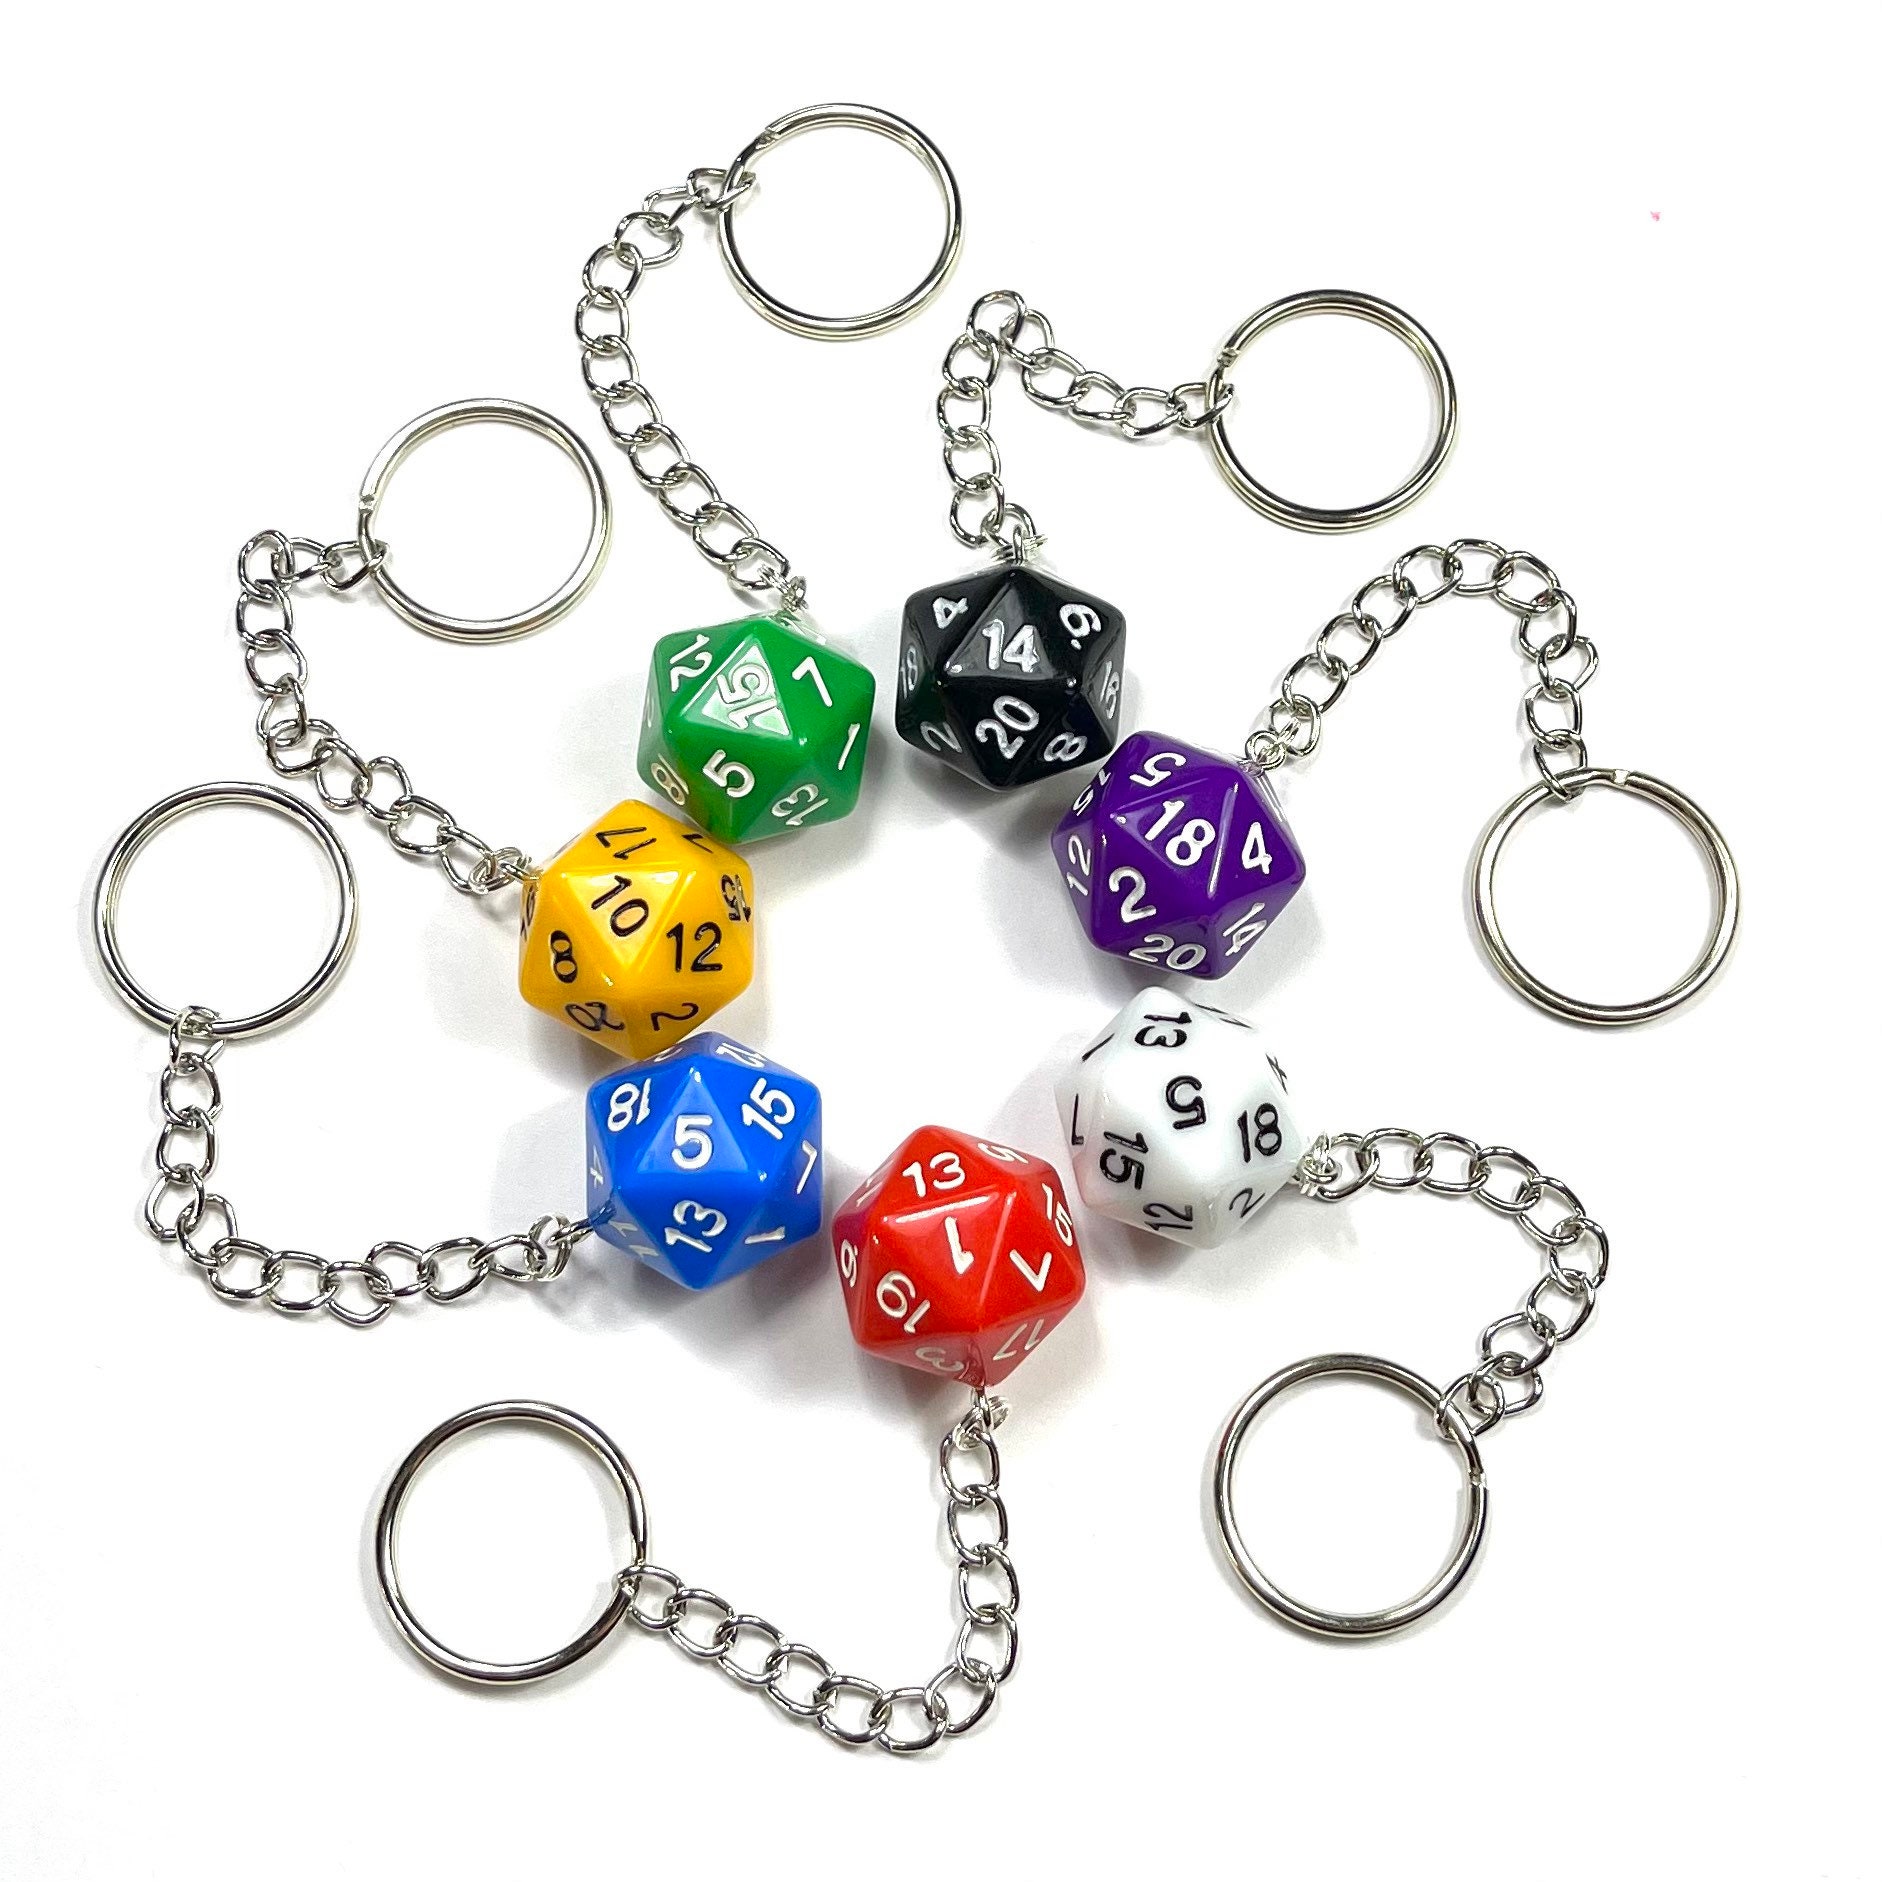 Dice Key Ring Key Chain - Keyring Keychain Multi Colour D&D board game  boardgame